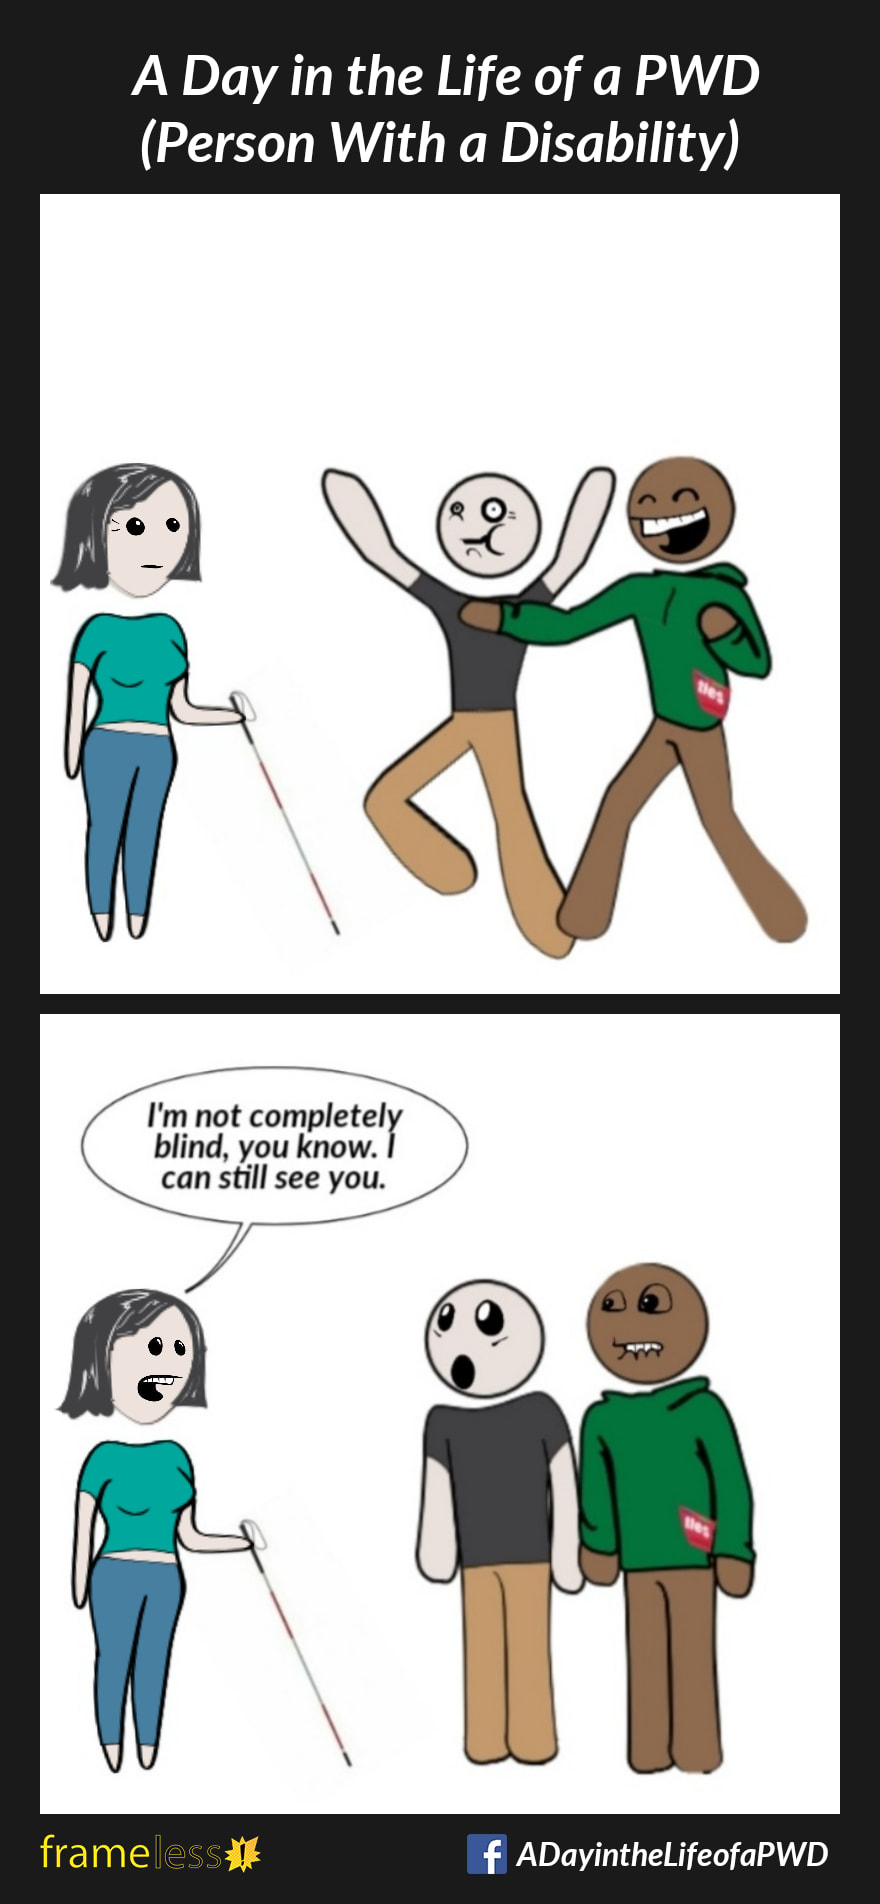 COMIC STRIP 
A Day in the Life of a PWD (Person With a Disability) 

Frame 1:
Two men are mocking and laughing at a woman who uses a white cane.

Frame 2:
WOMAN: I'm not completely blind, you know. I can still see you.
The men are surprised and embarrassed. 